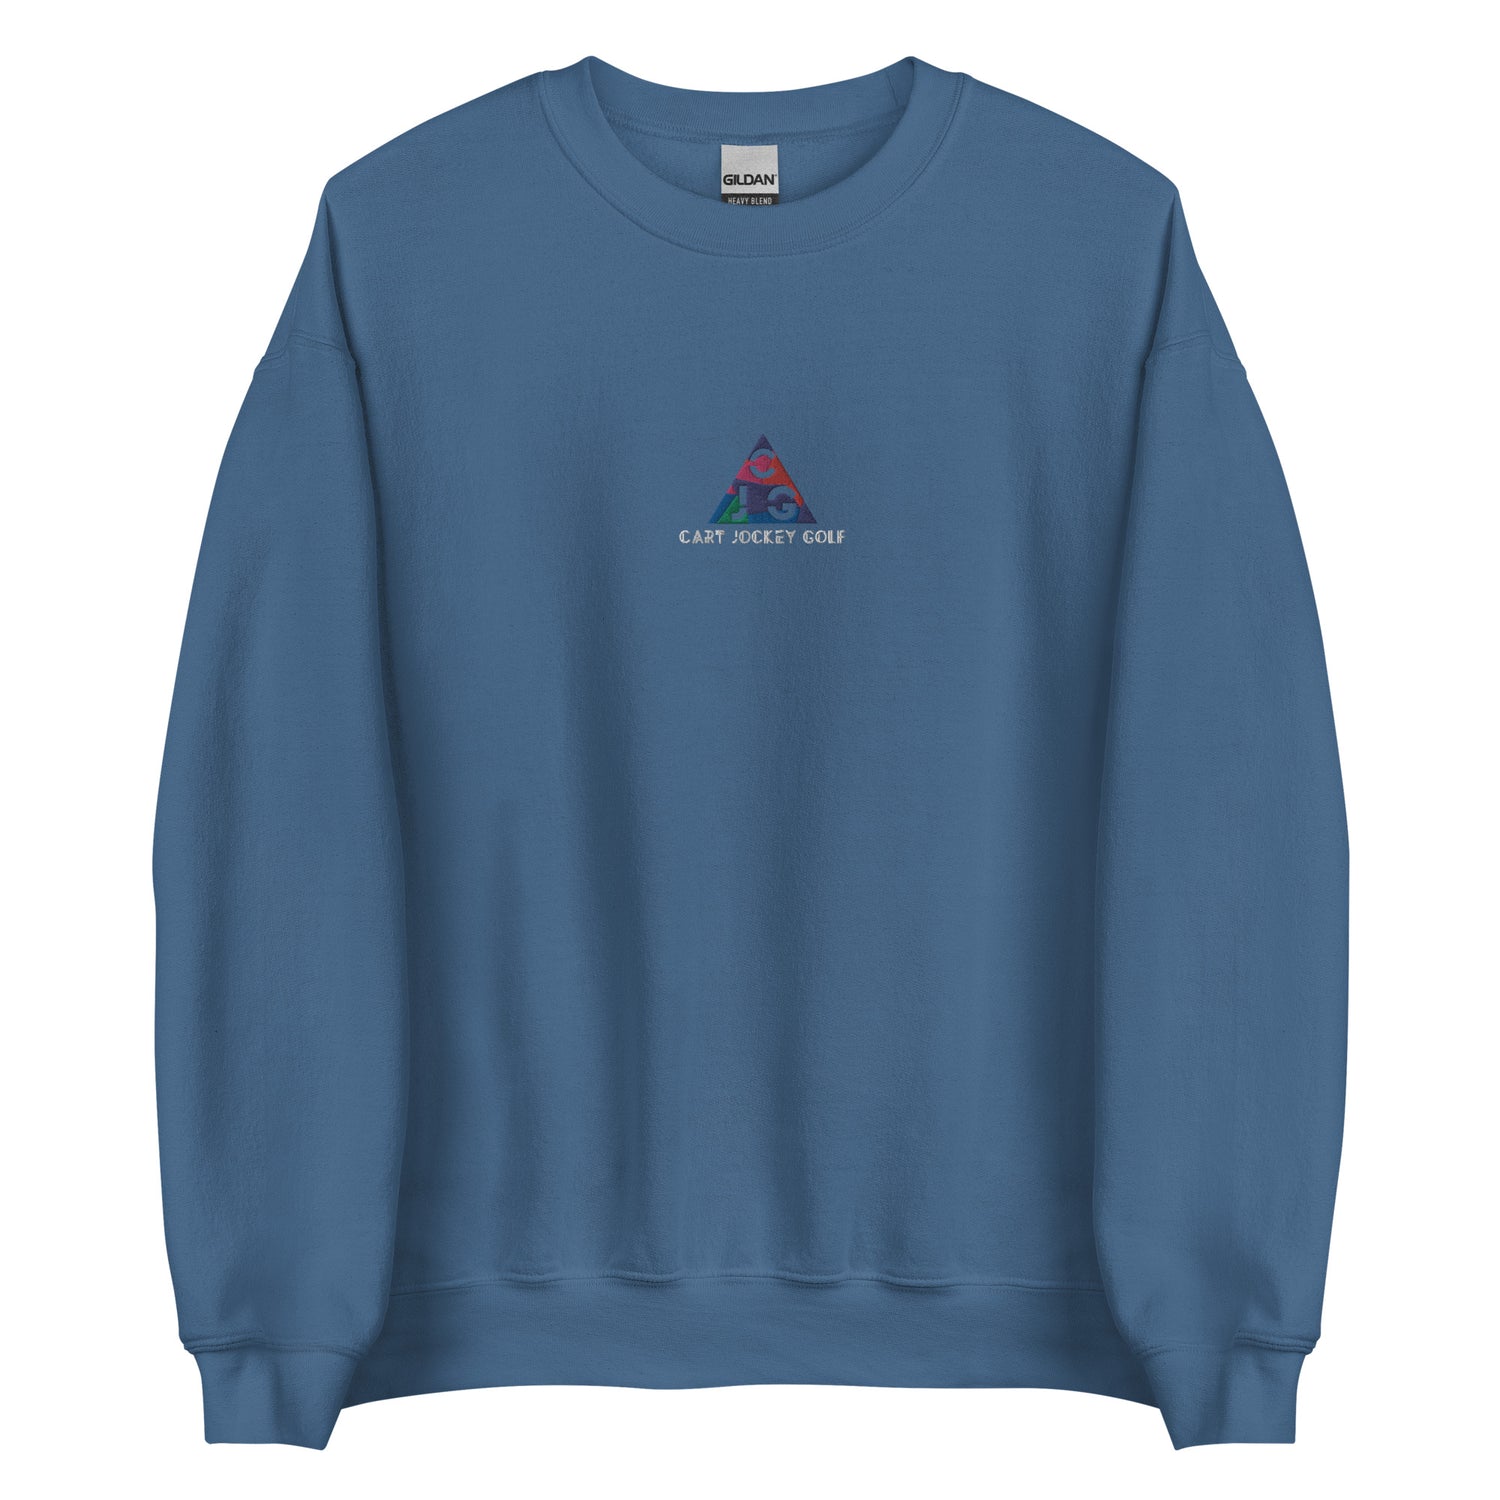 a Triangle Embroidered Crewneck by Cart Jockey Golf with the logo of a mountain on it.